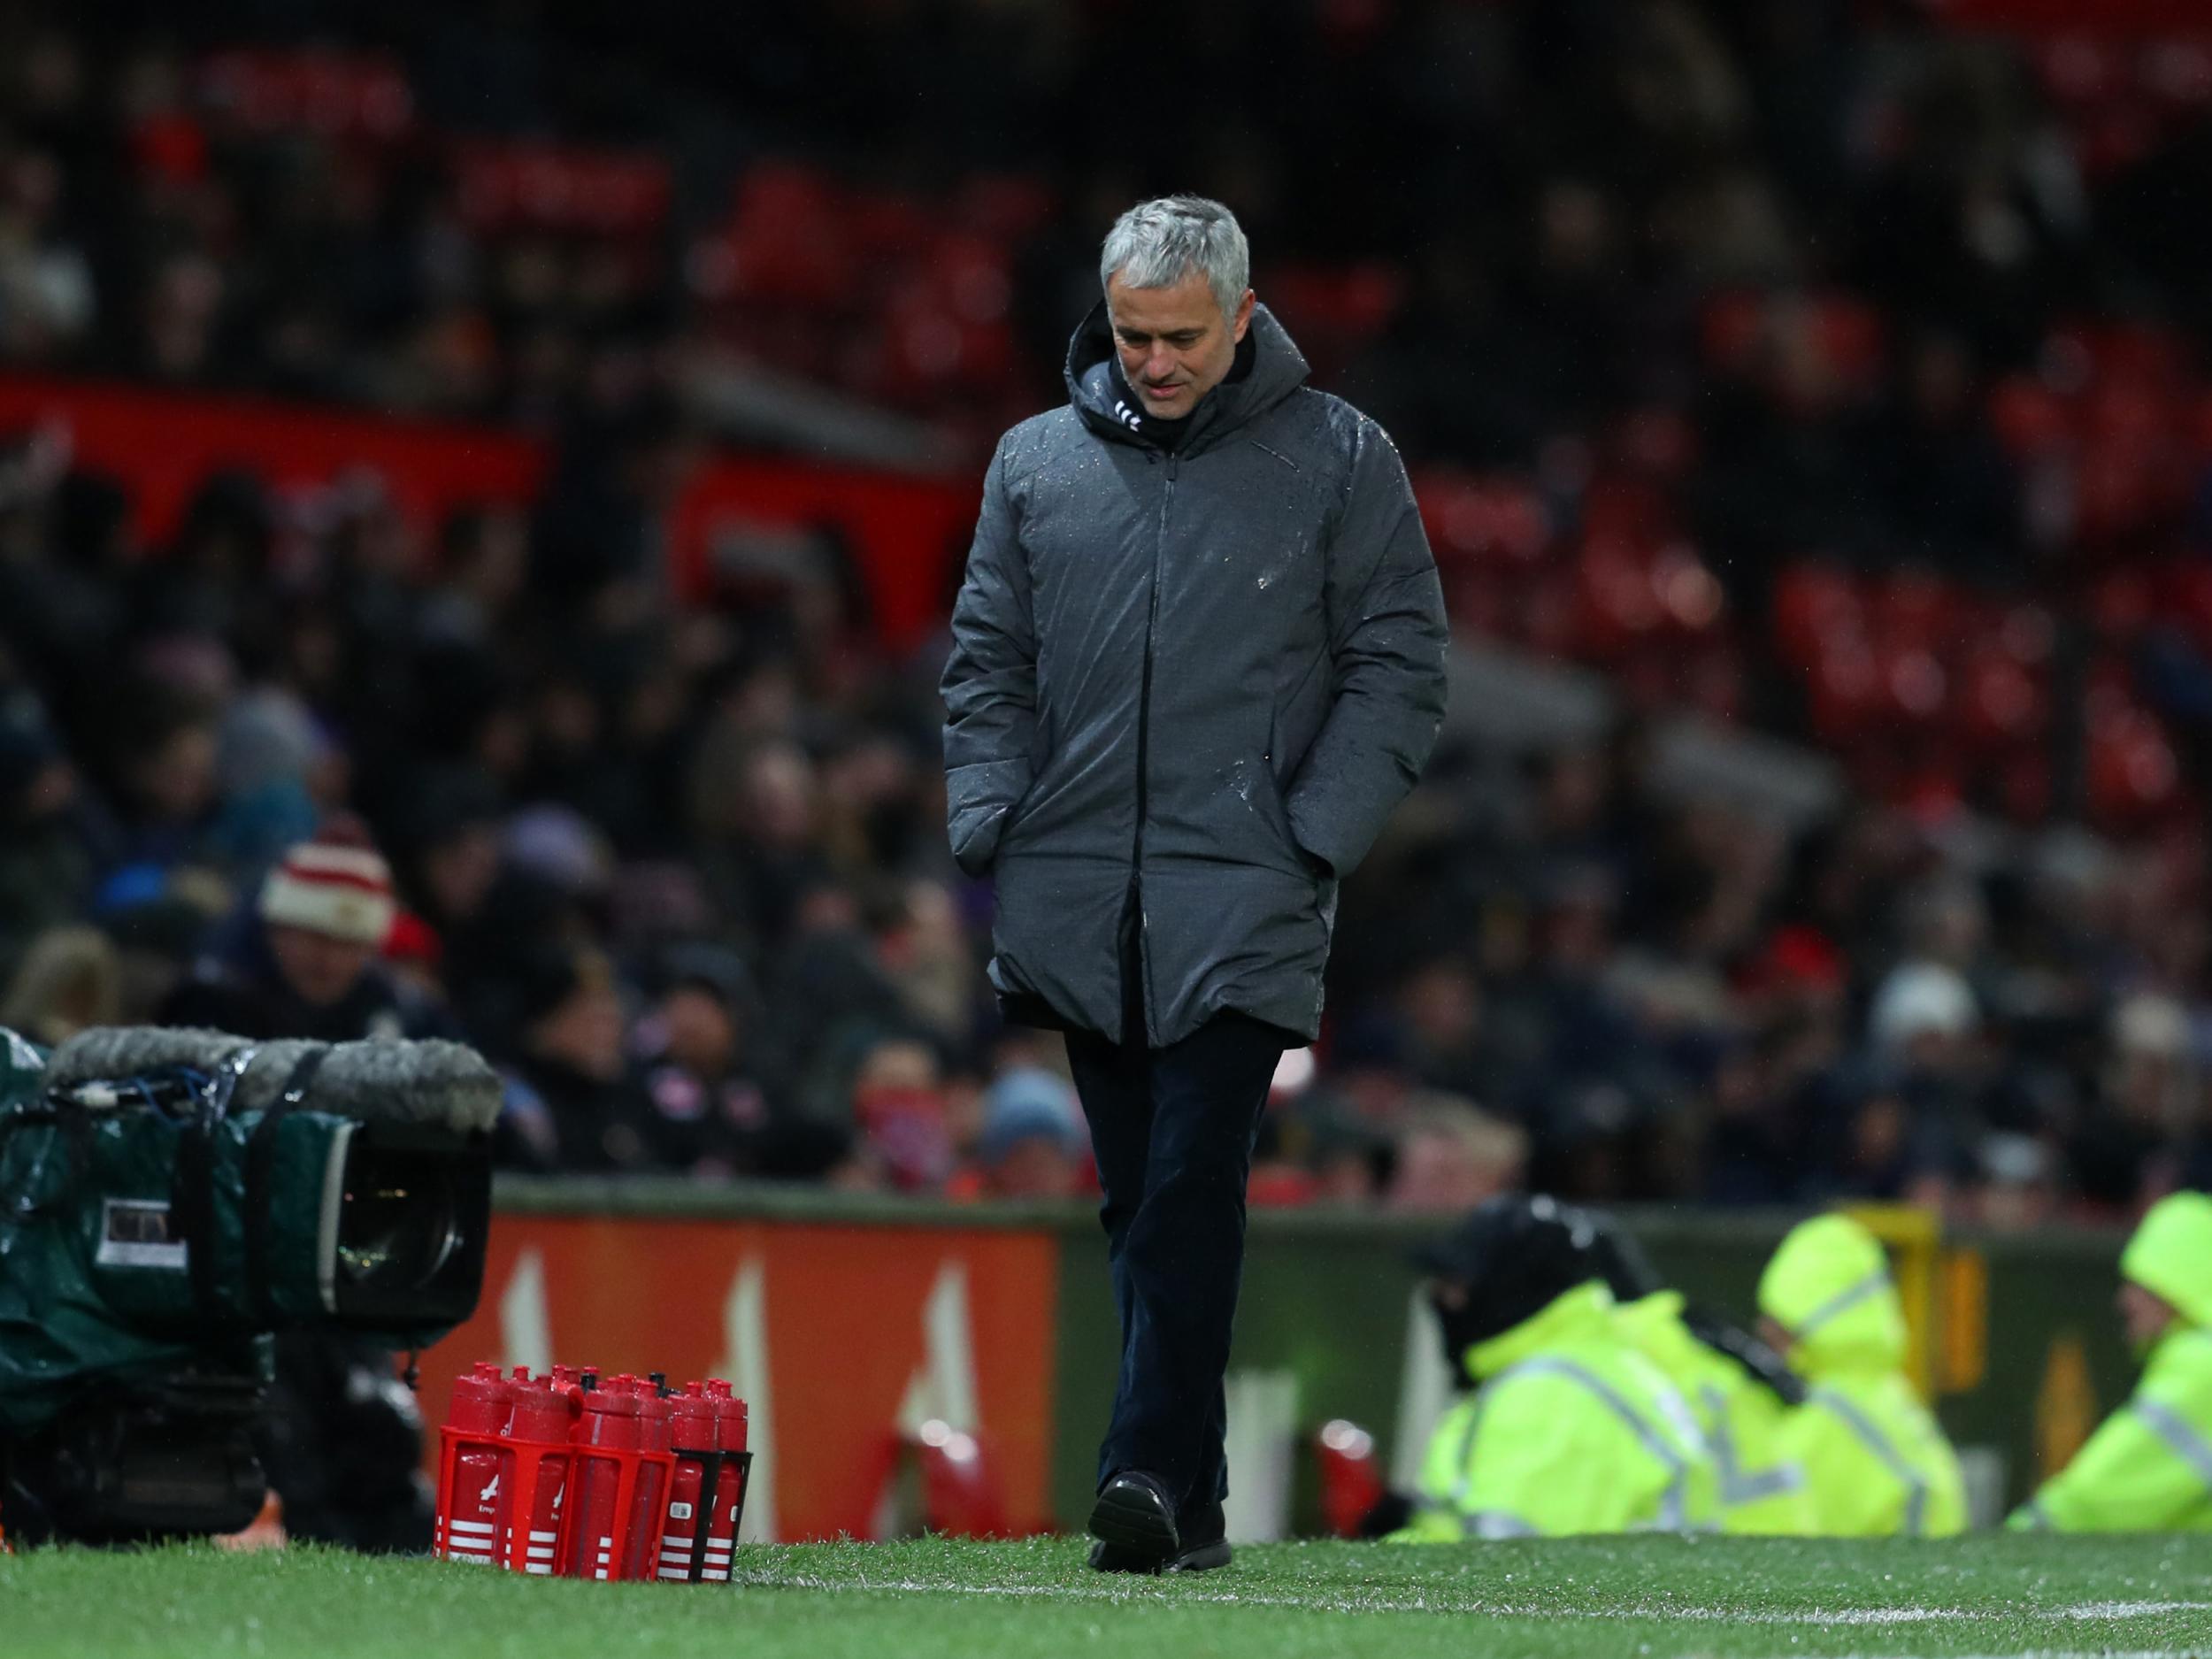 Jose Mourinho was the master of blowing opponents away early in the season